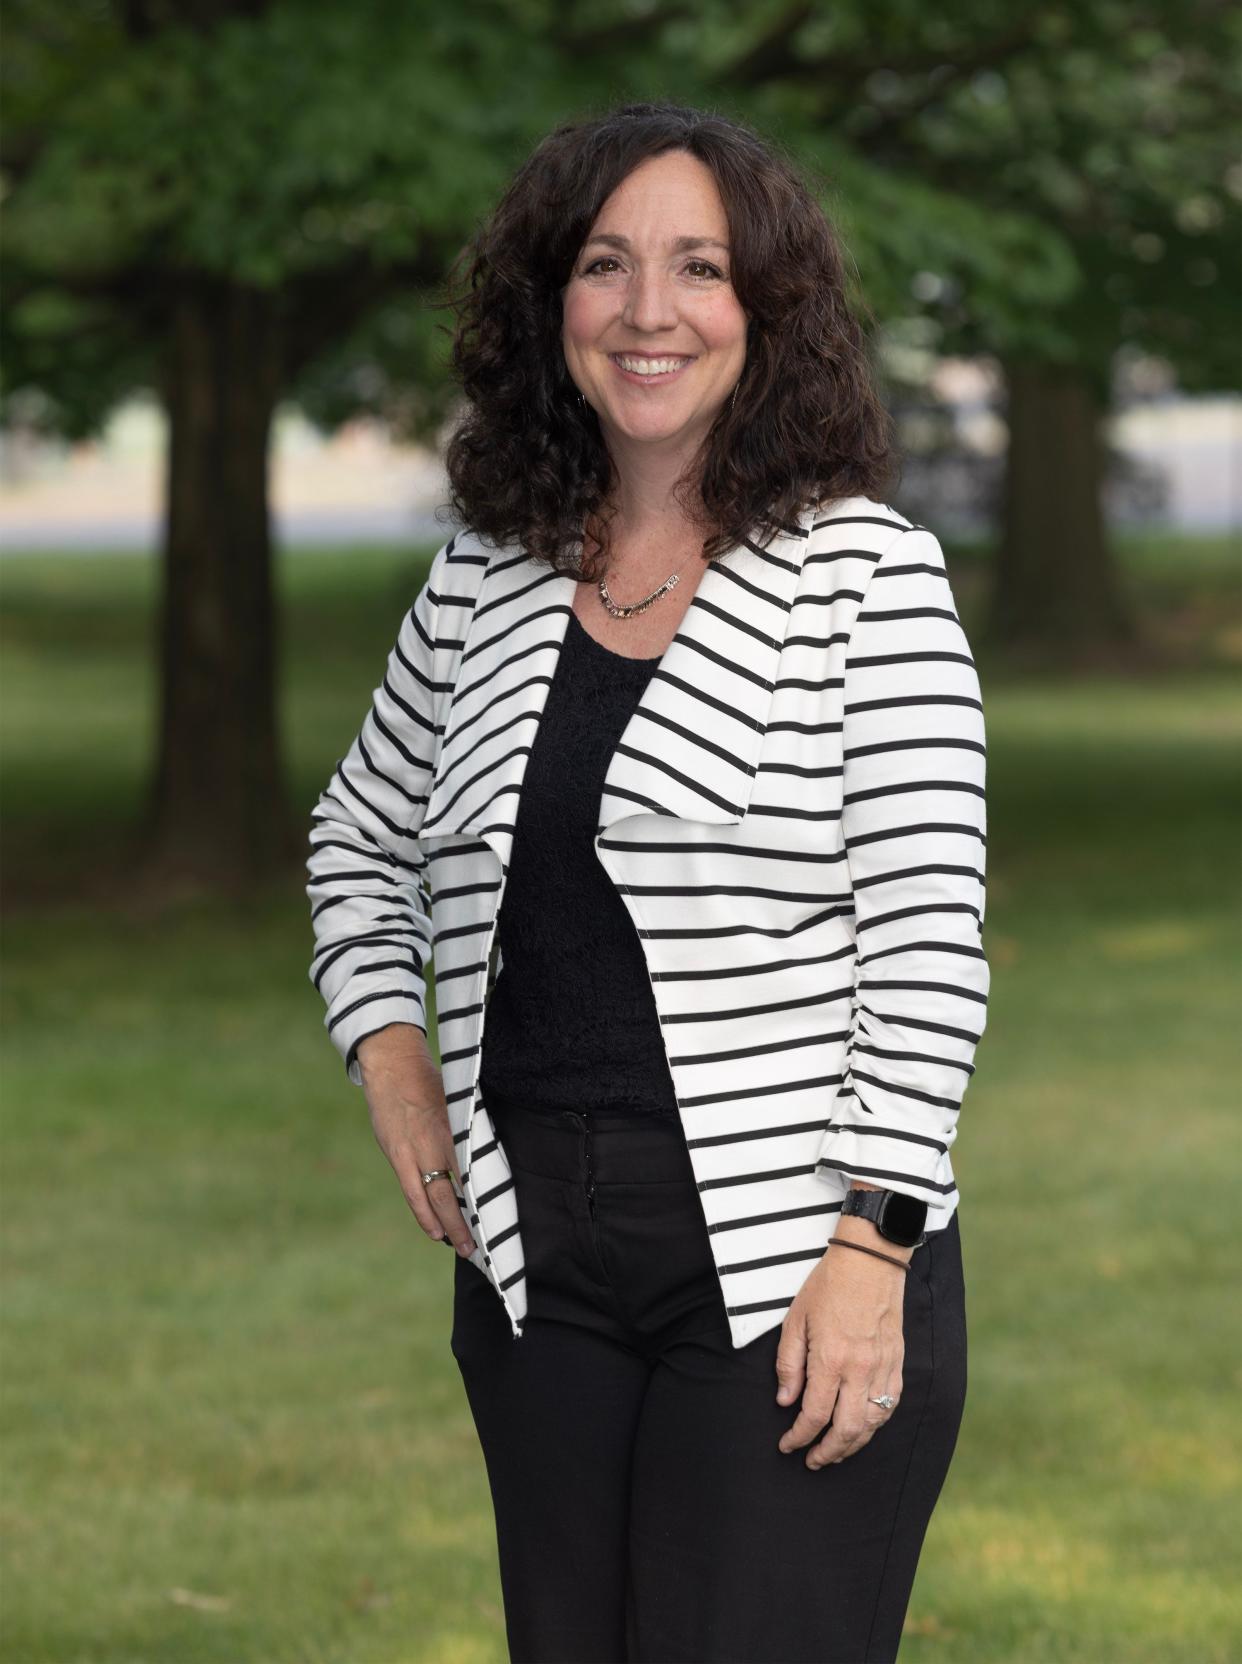 Christina Schnyders is the first female provost at Malone University in Canton. Following a national search, she began her new position in March.